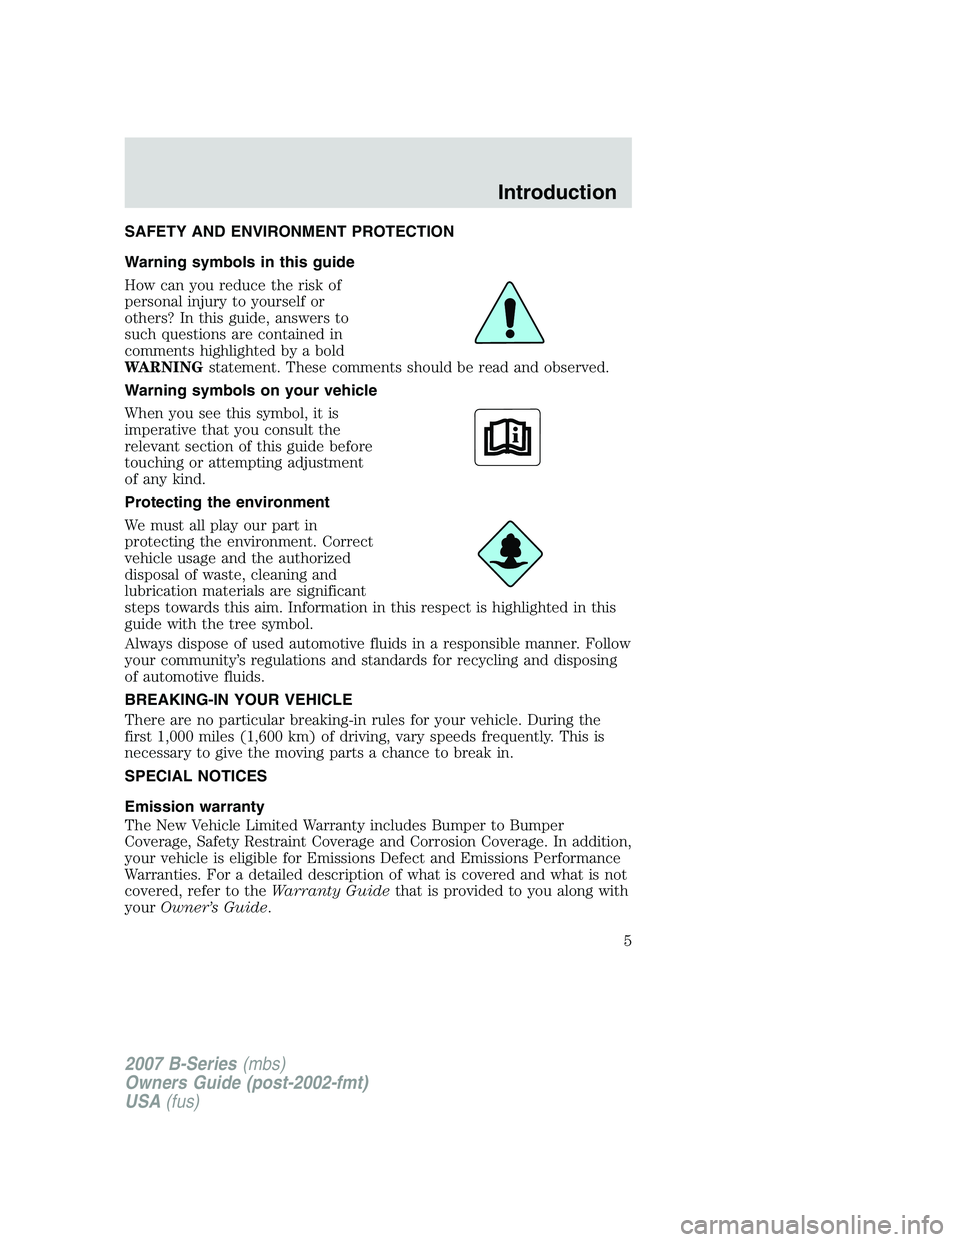 MAZDA MODEL B3000 TRUCK 2007  Owners Manual SAFETY AND ENVIRONMENT PROTECTION
Warning symbols in this guide
How can you reduce the risk of
personal injury to yourself or
others? In this guide, answers to
such questions are contained in
comments